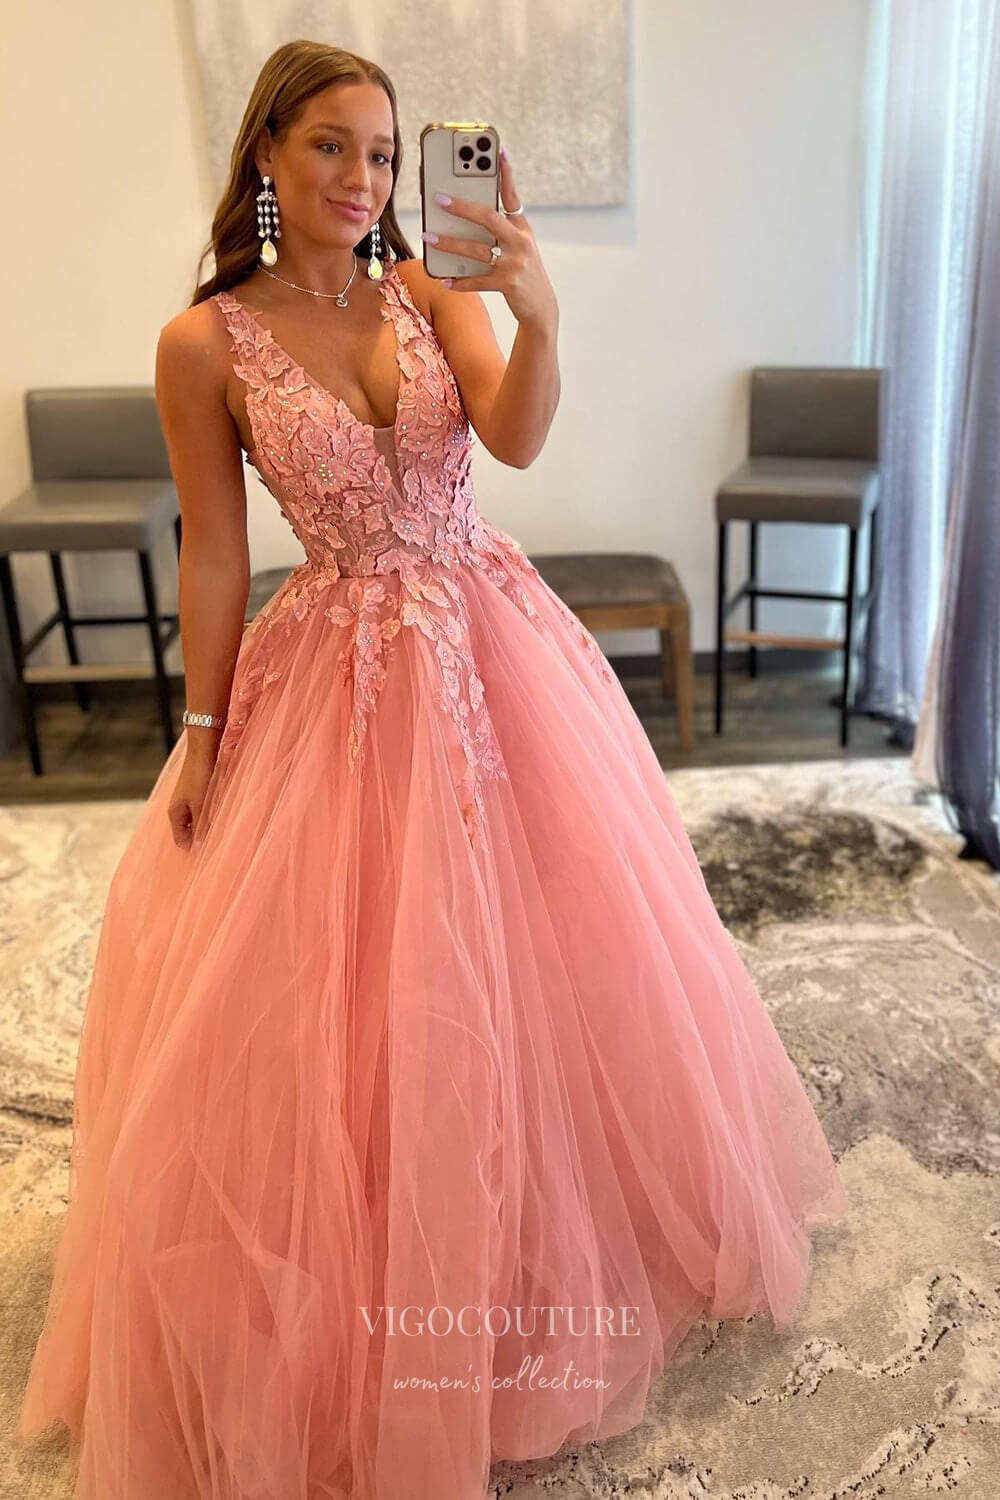 Orange Lace Applique Prom Dresses Pink Spaghetti Strap Plunging V-Neck Evening Gown 21888-Prom Dresses-vigocouture-Orange-US2-vigocouture